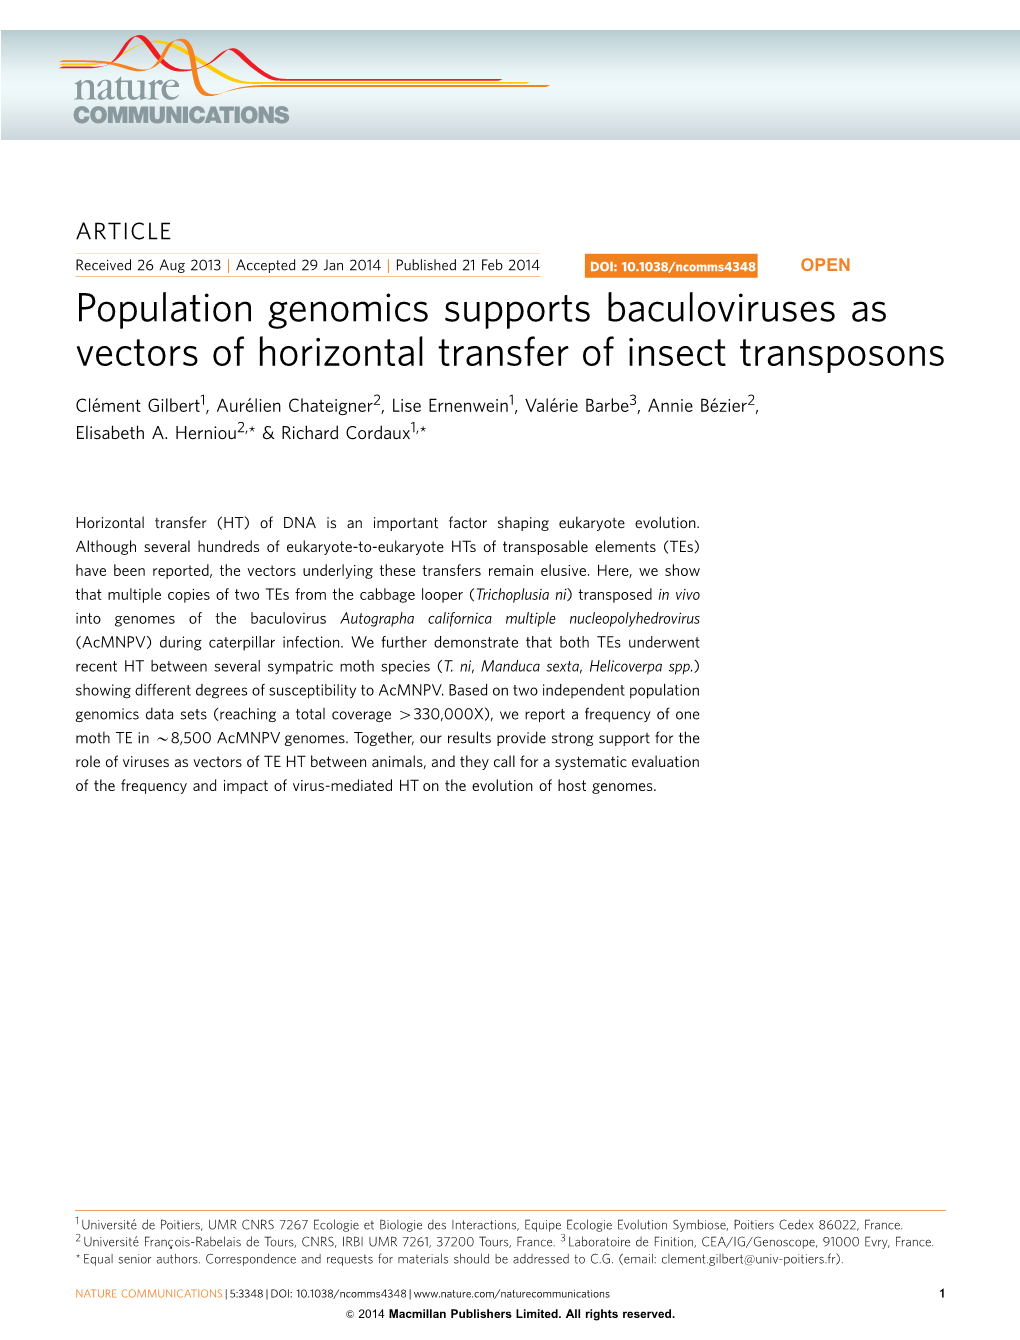 Population Genomics Supports Baculoviruses As Vectors of Horizontal Transfer of Insect Transposons